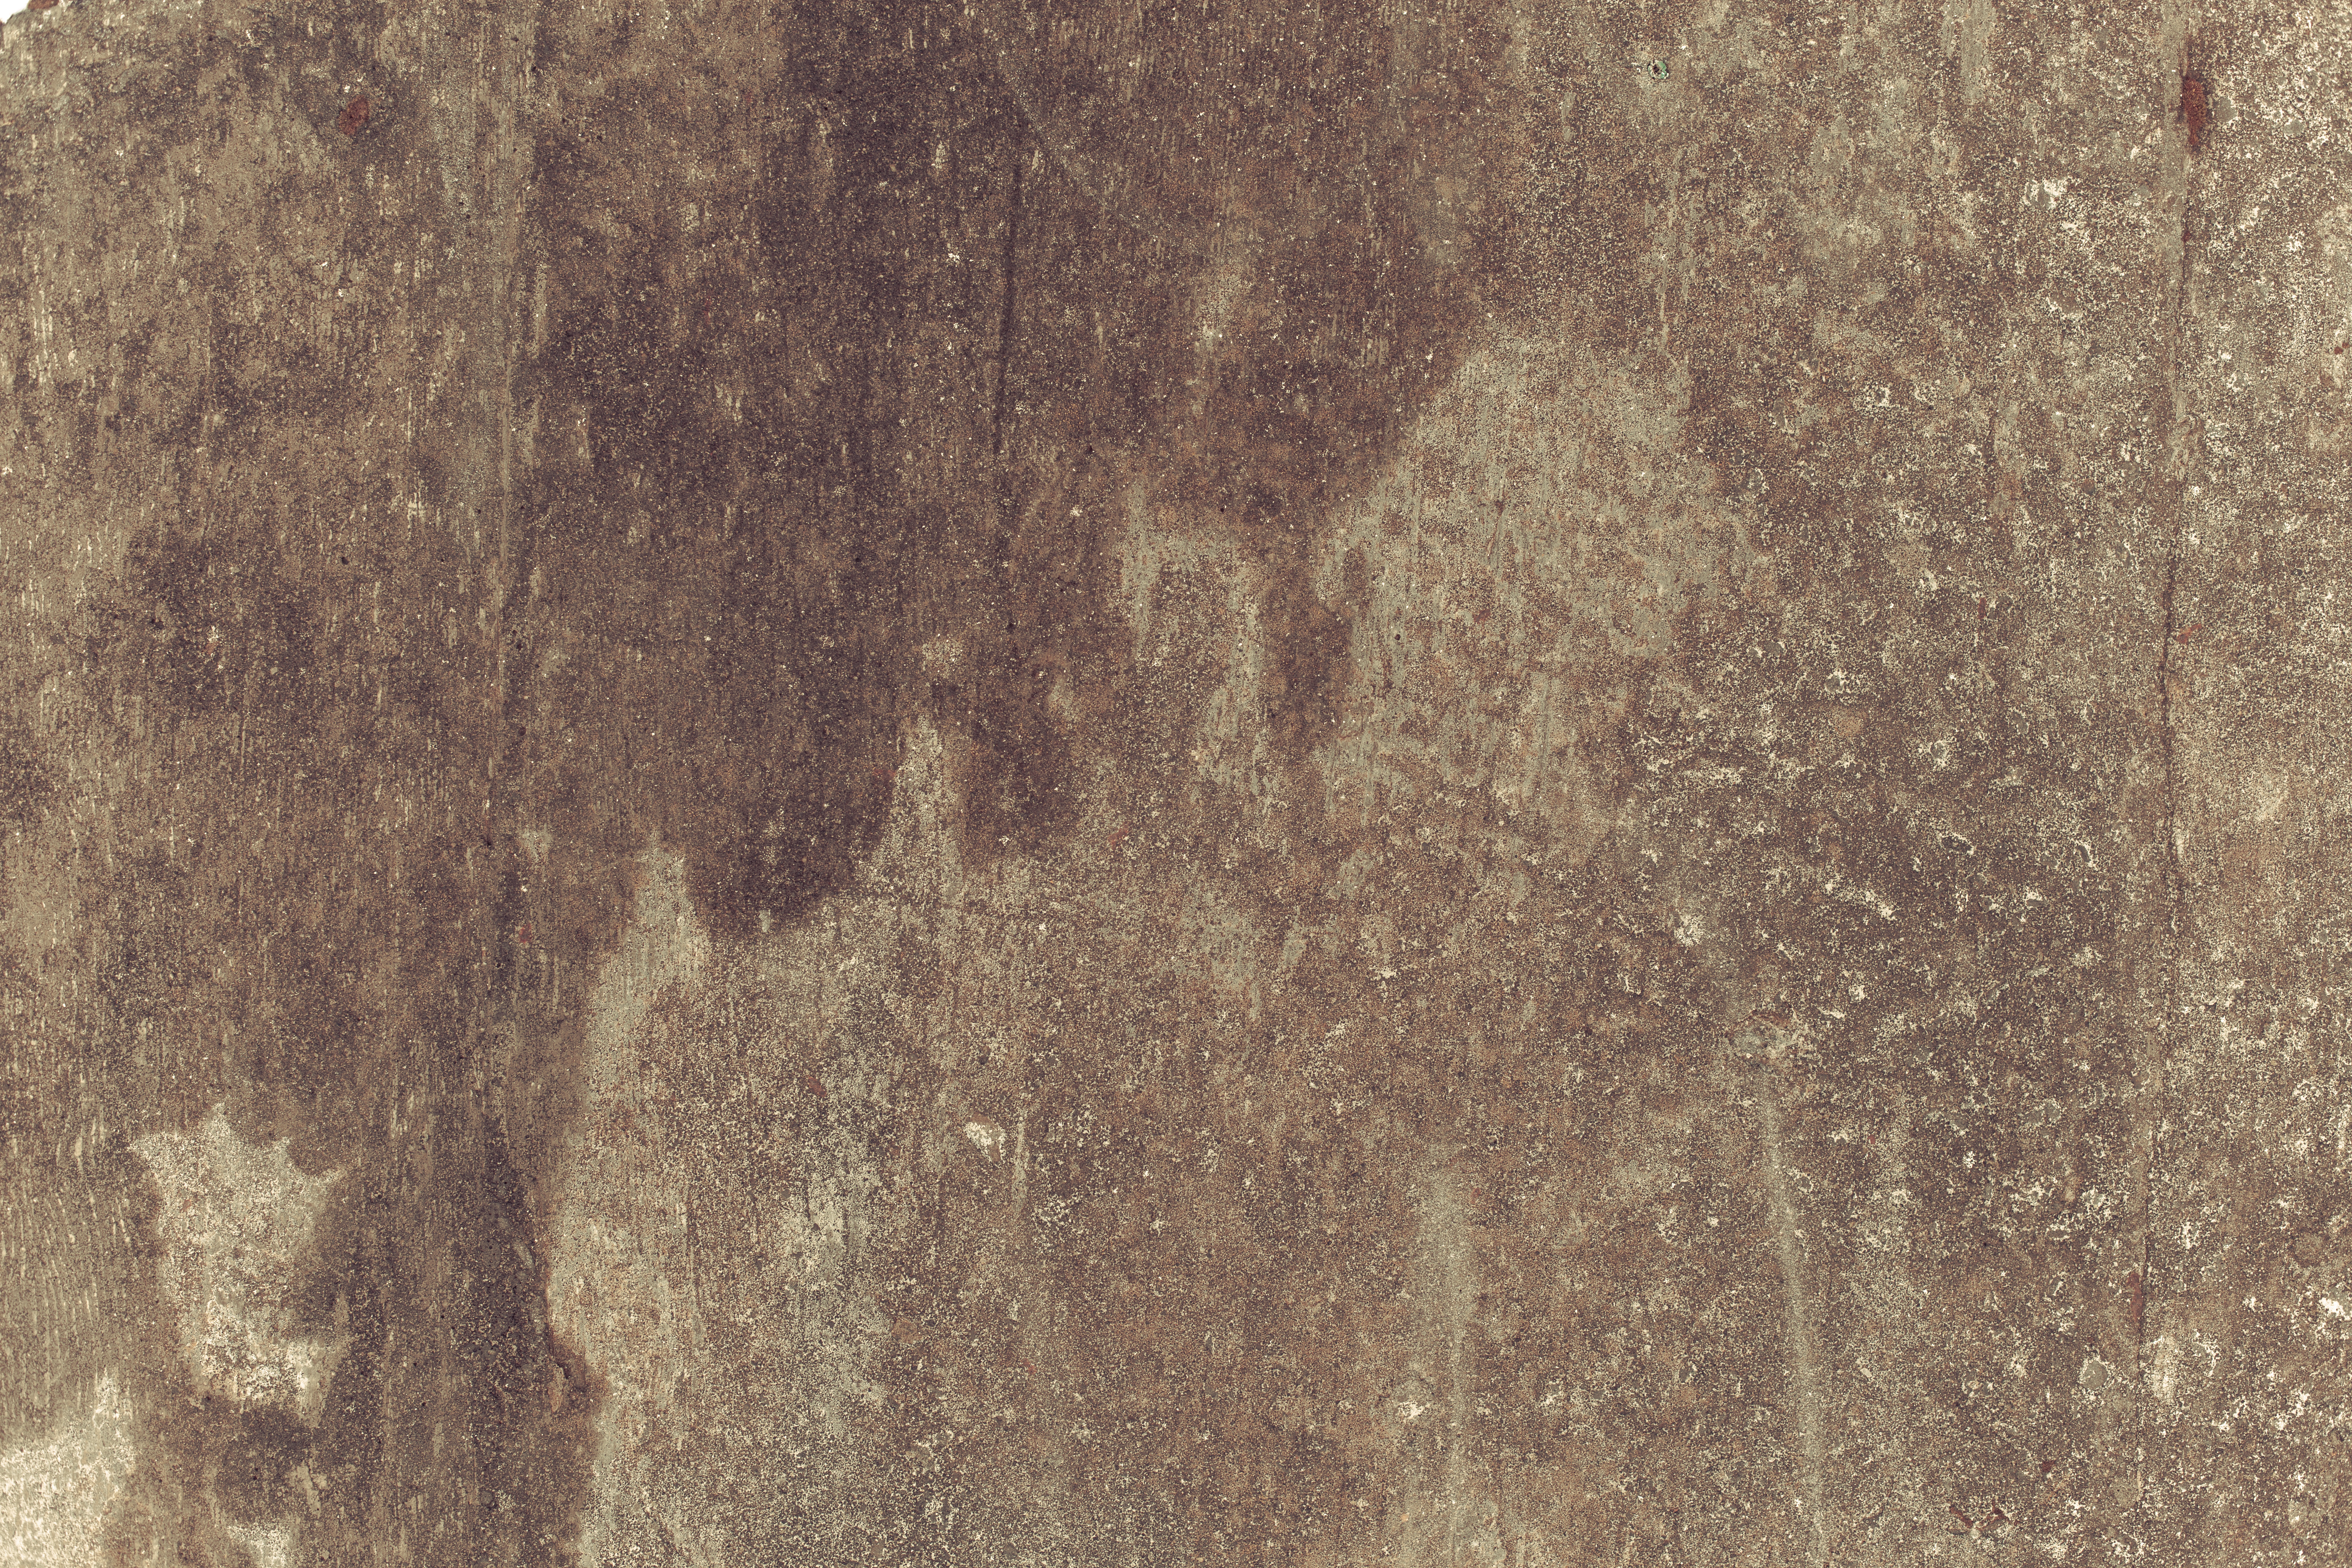 Brown stained concrete background photo